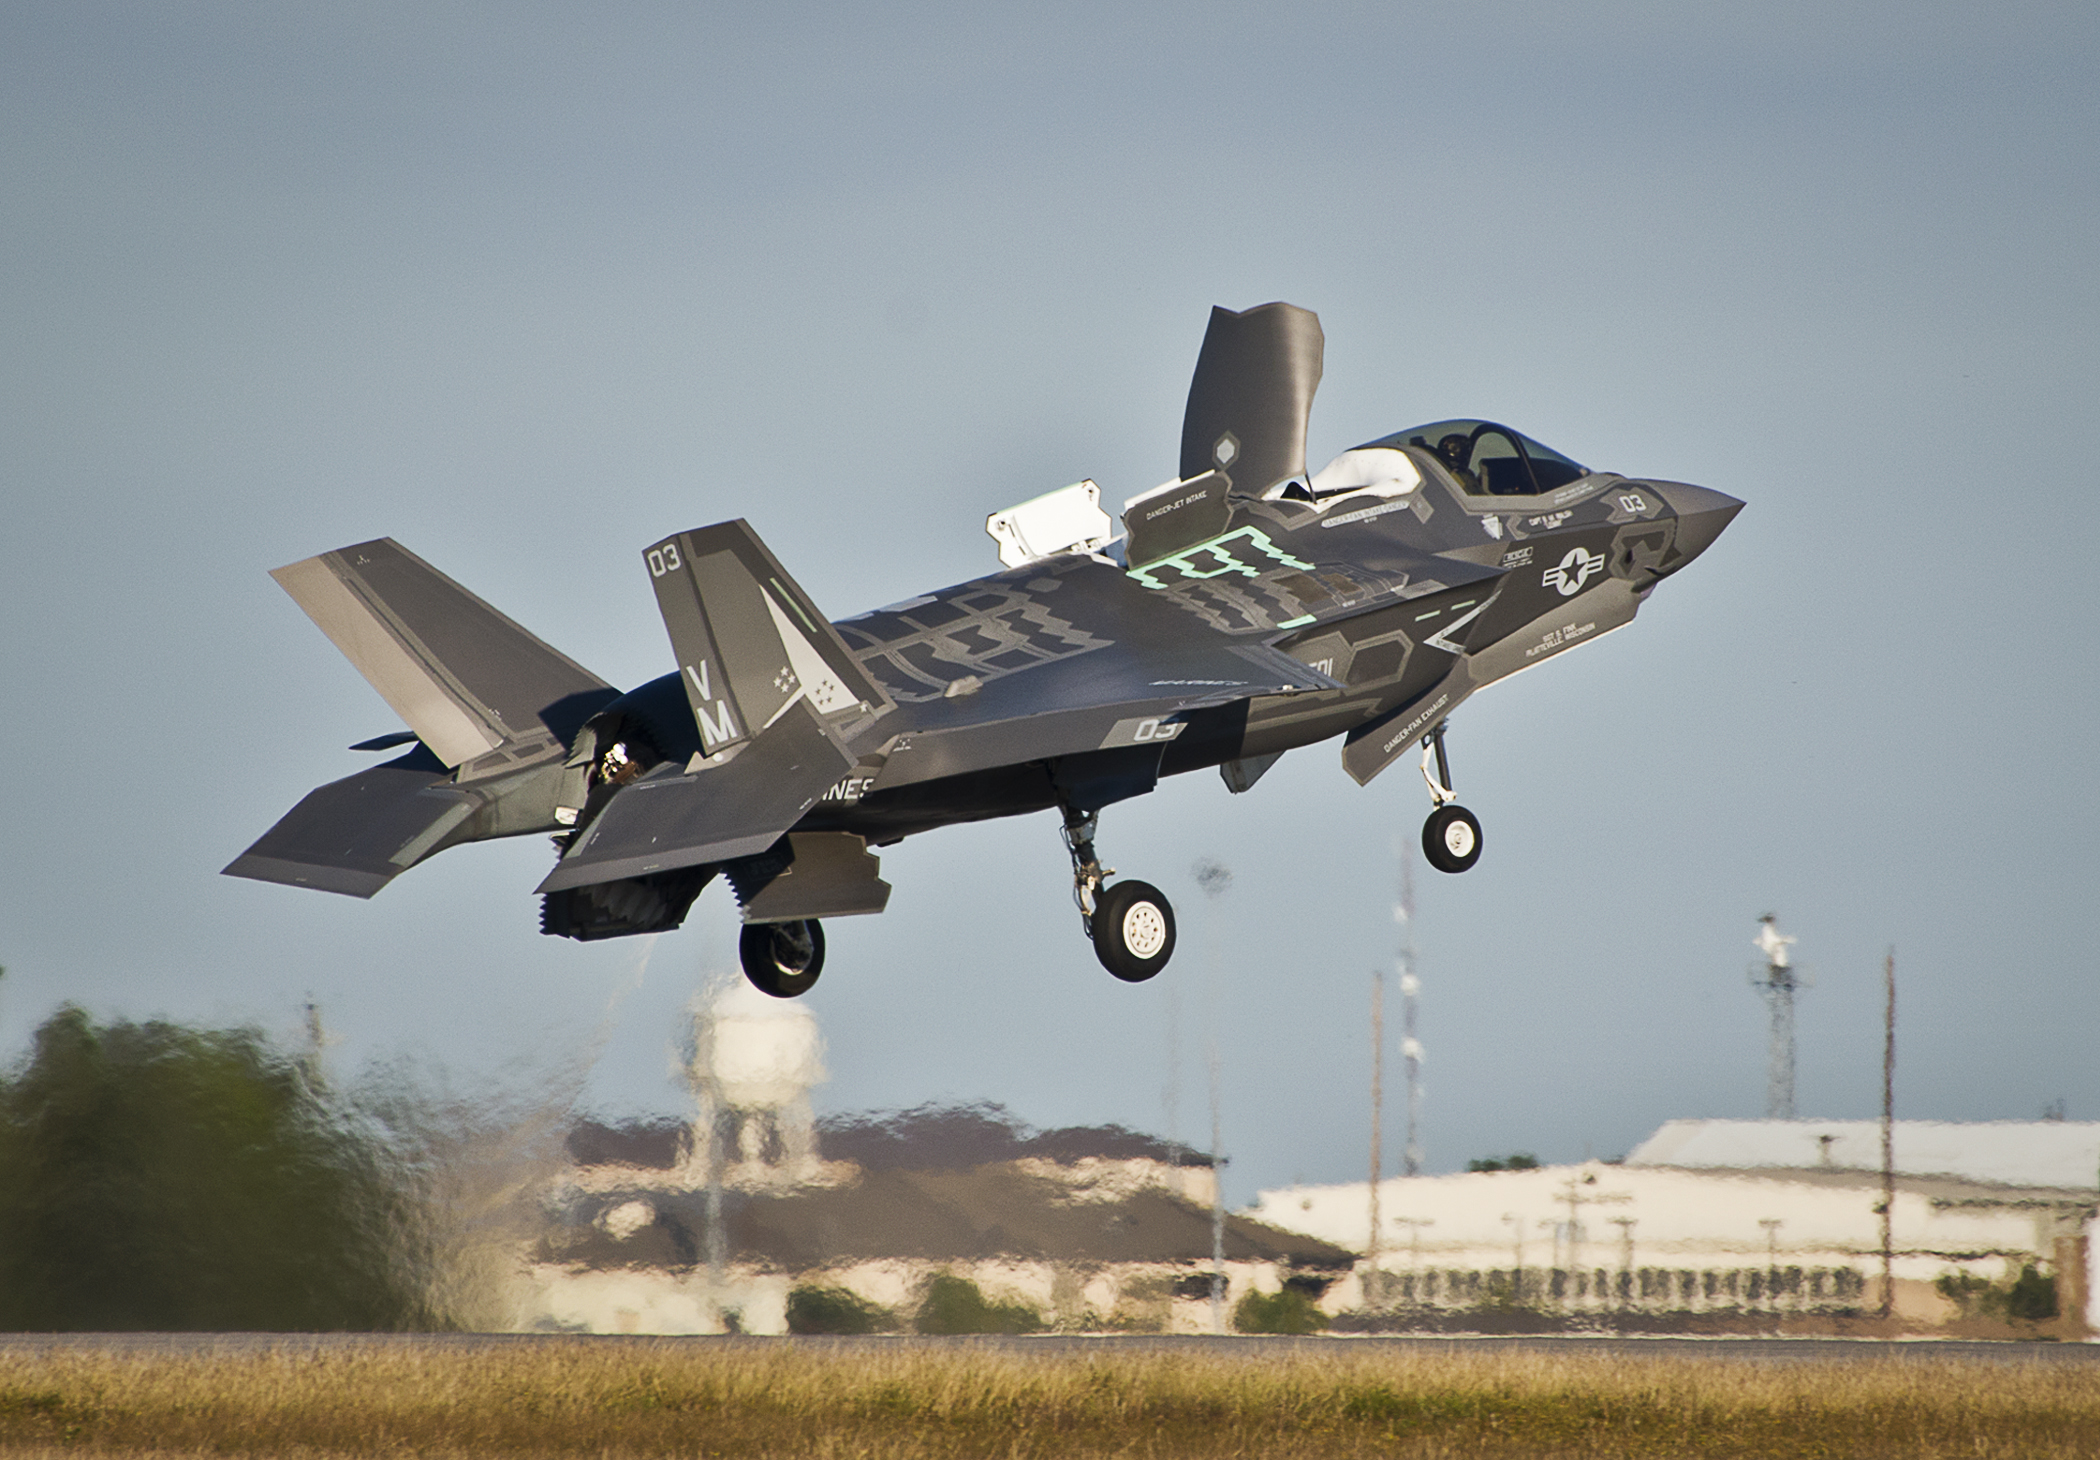 Dunford Mulls F-35B IOC Decision; 4 Bs Take Out 9 Attackers